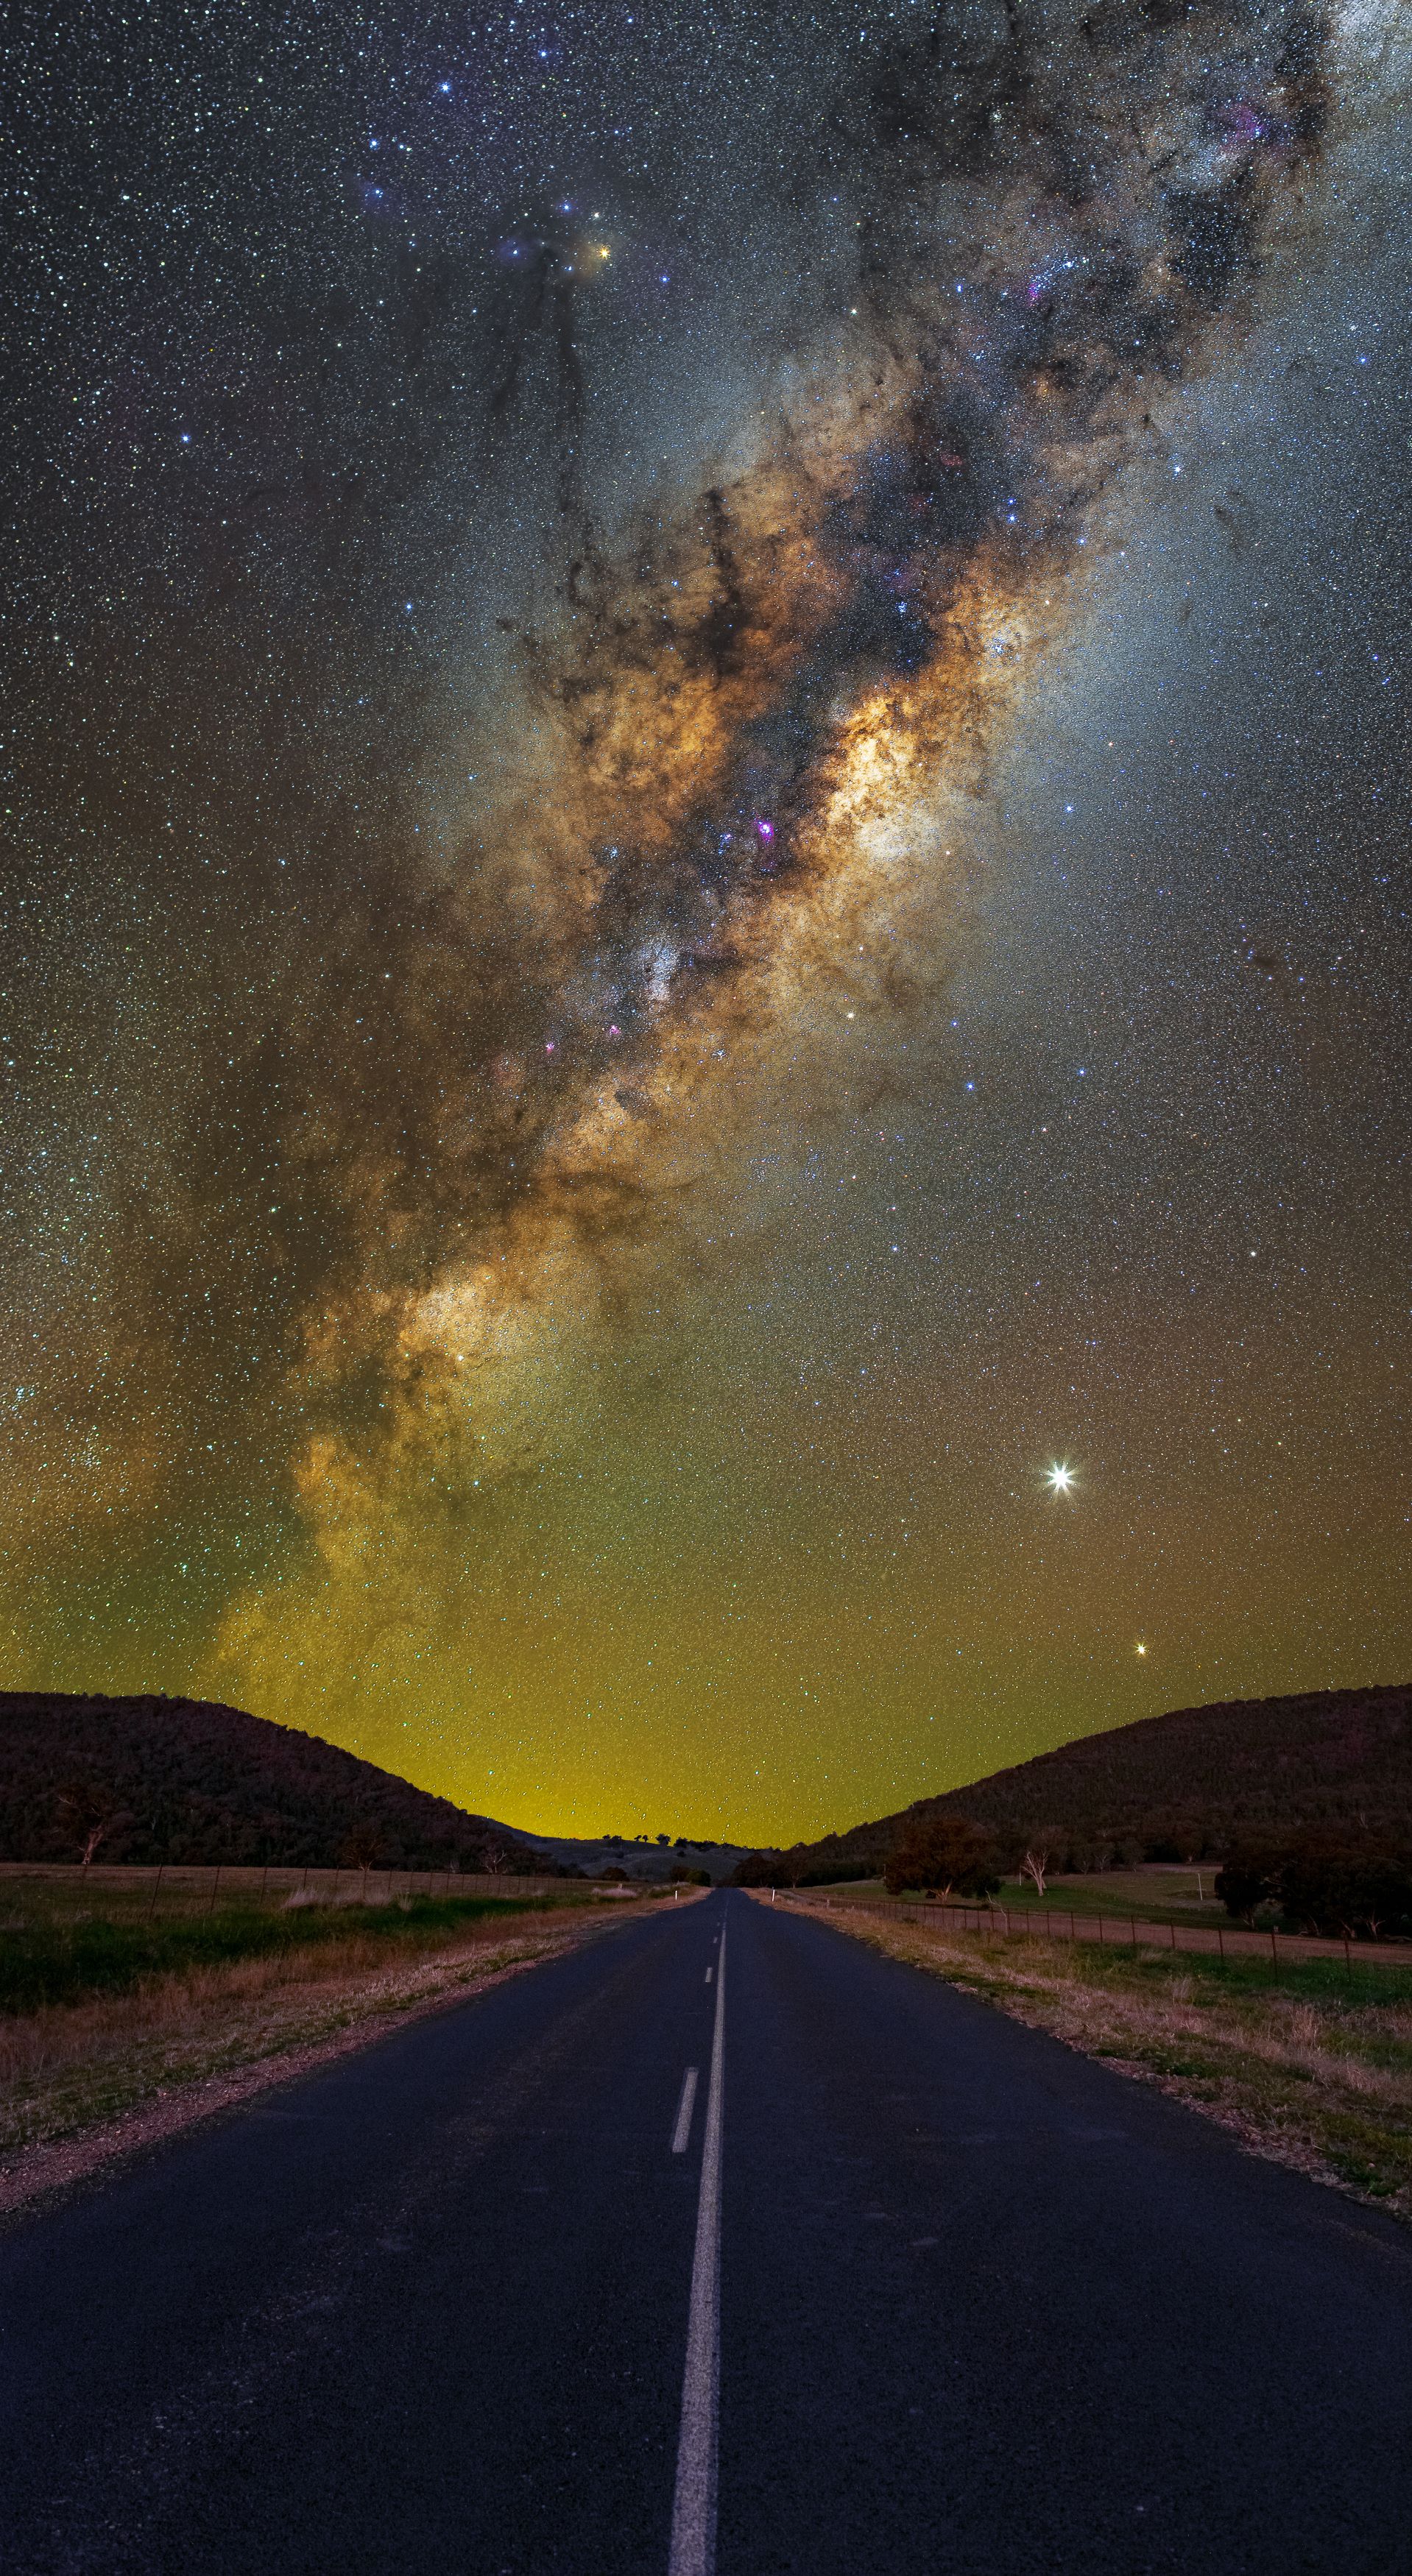 #milkyway #stars #love #night #nikon #nightscapes, Imagery Fascinating